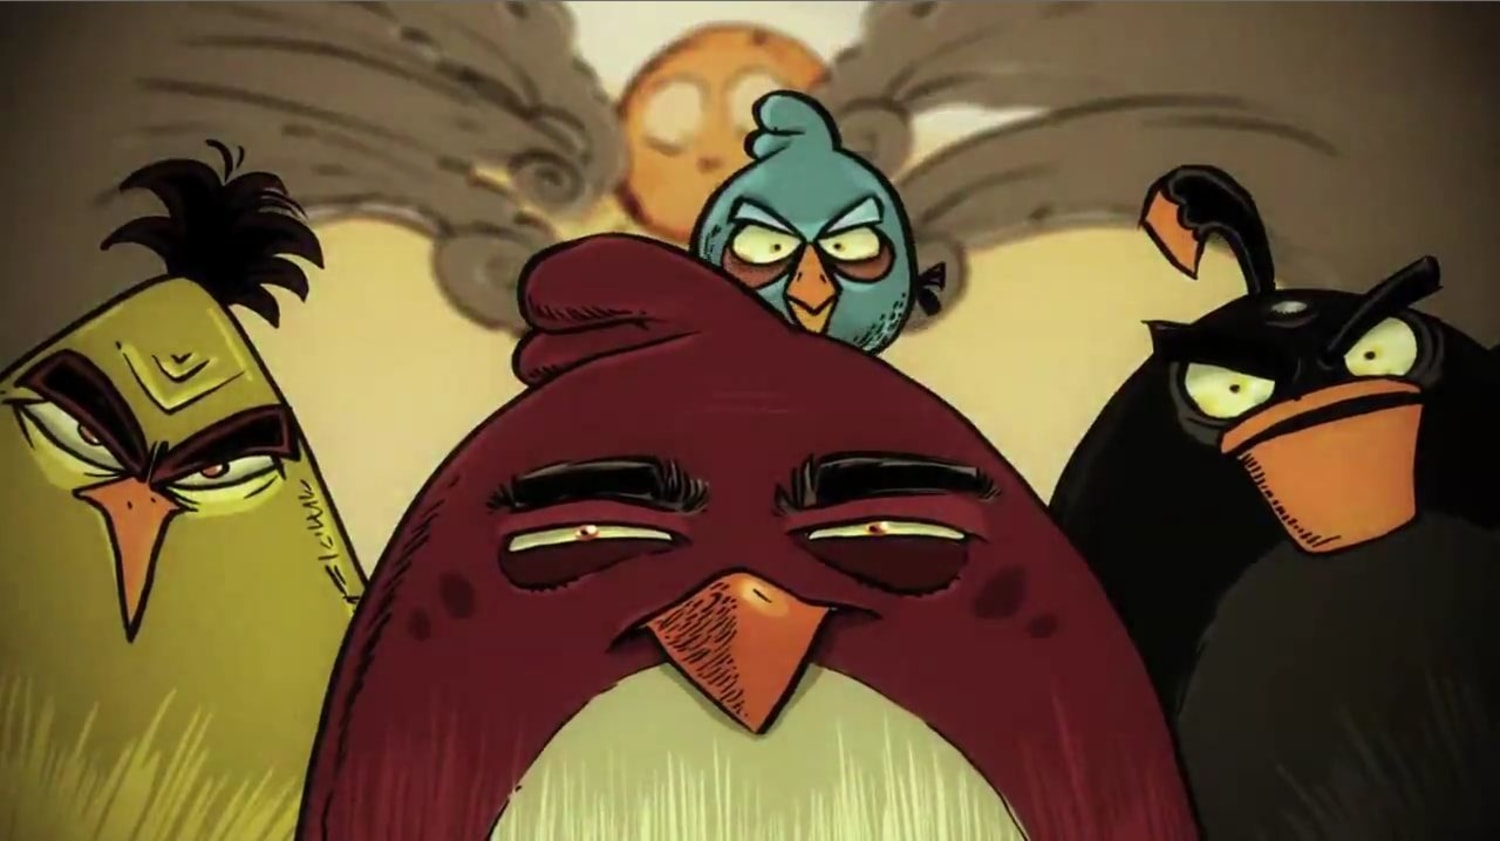 Angry Birds:' the next video game movie?